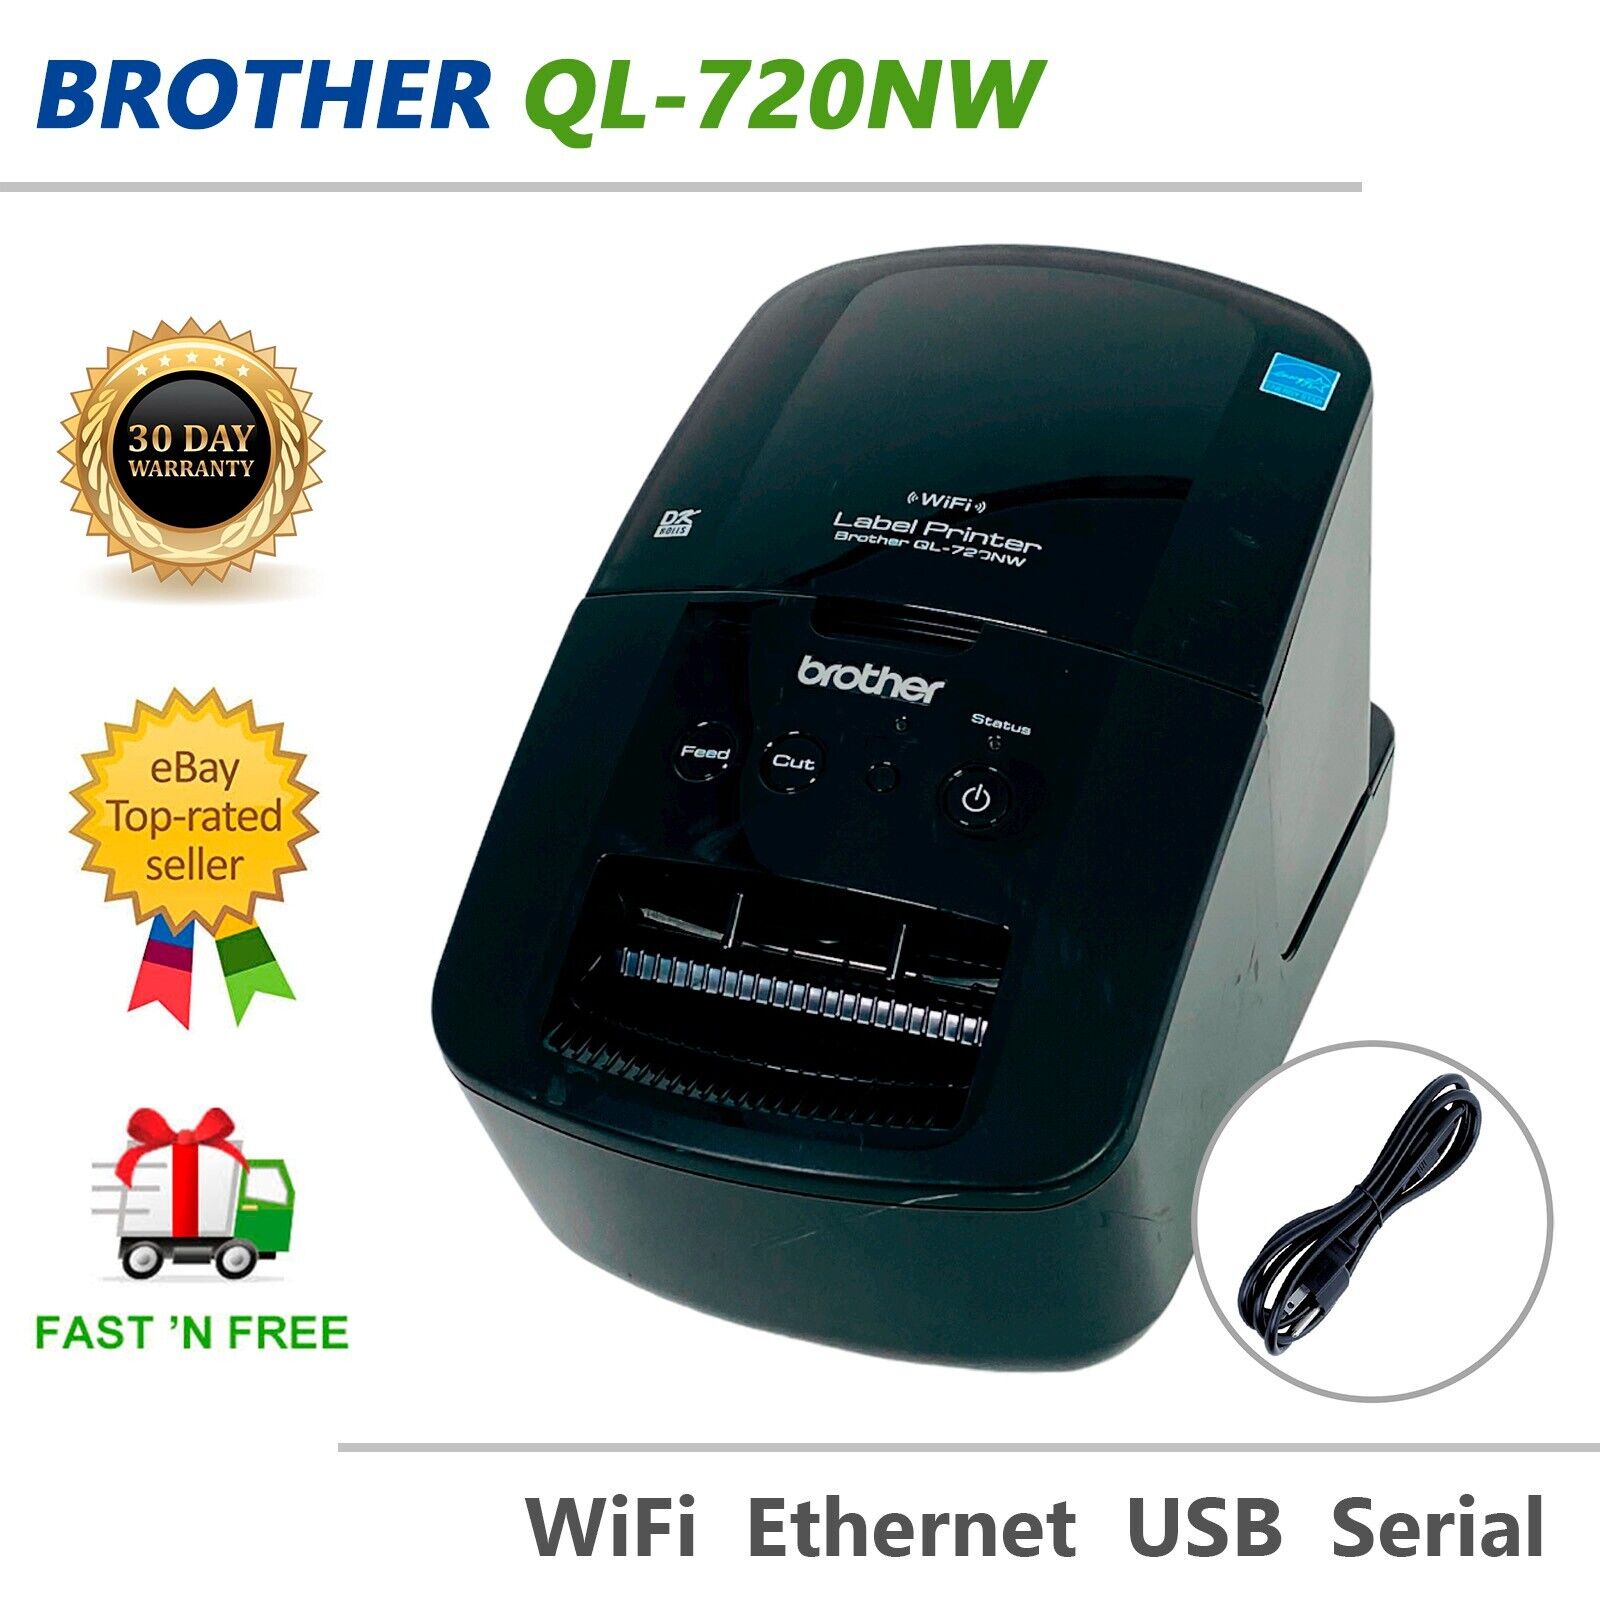 Brother QL-720NW Professional Thermal Barcode Printer WiFi Ethernet USB Serial